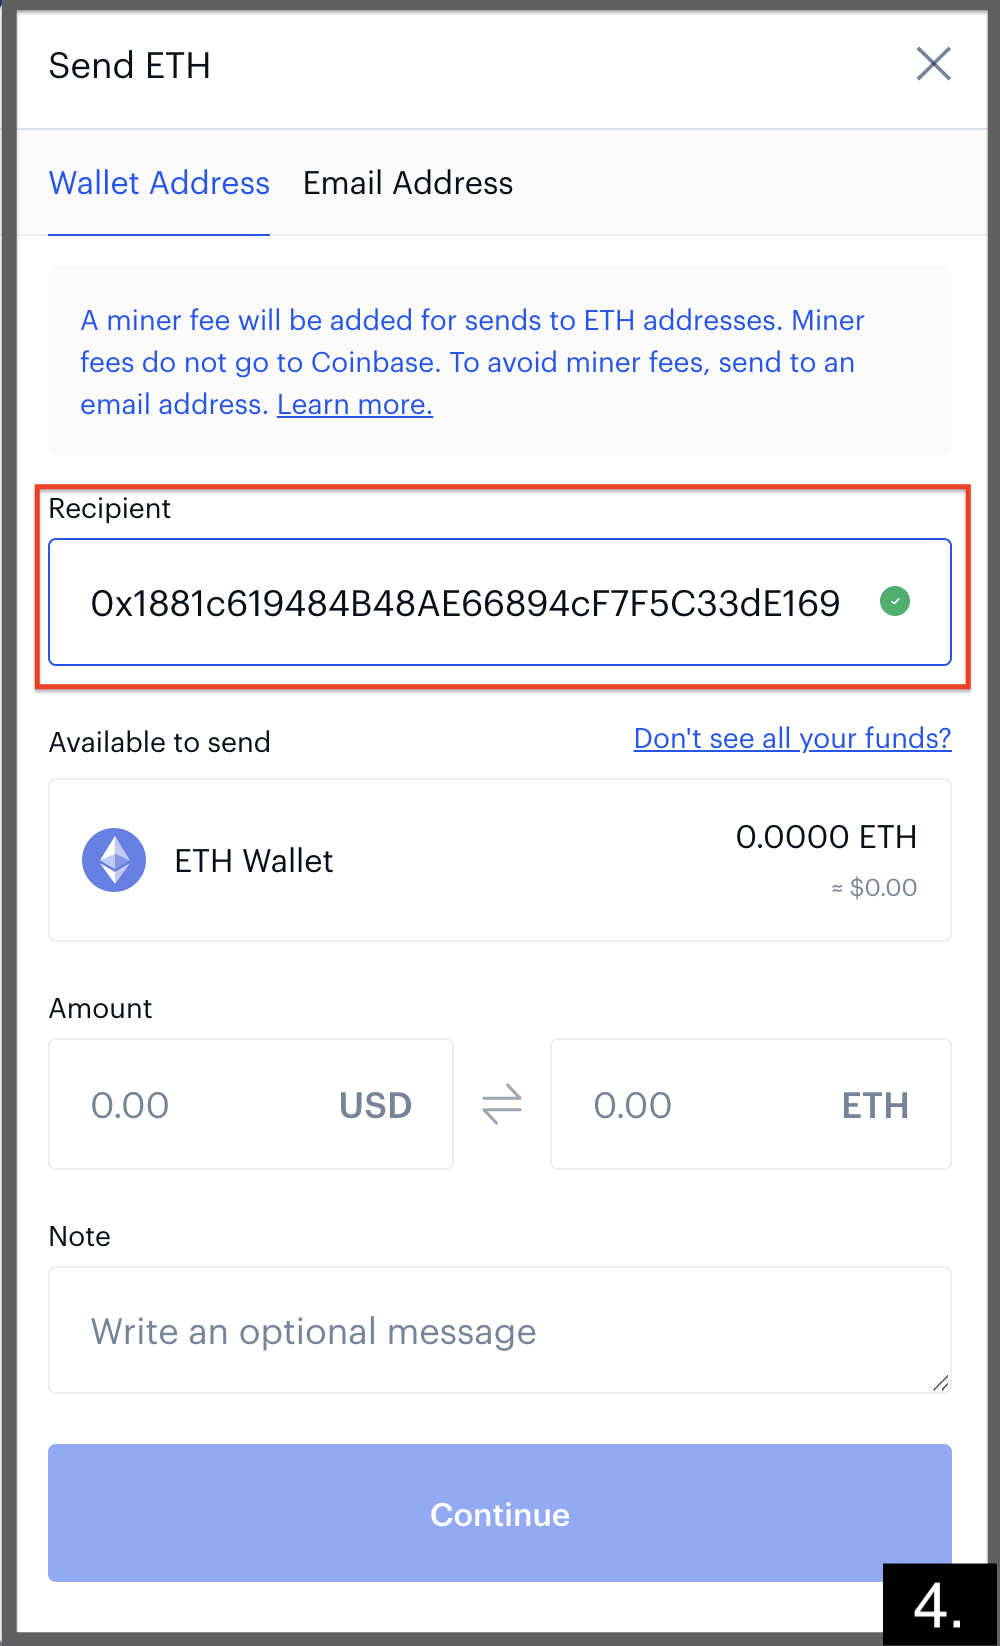 how to send coinbase to metamask wallet